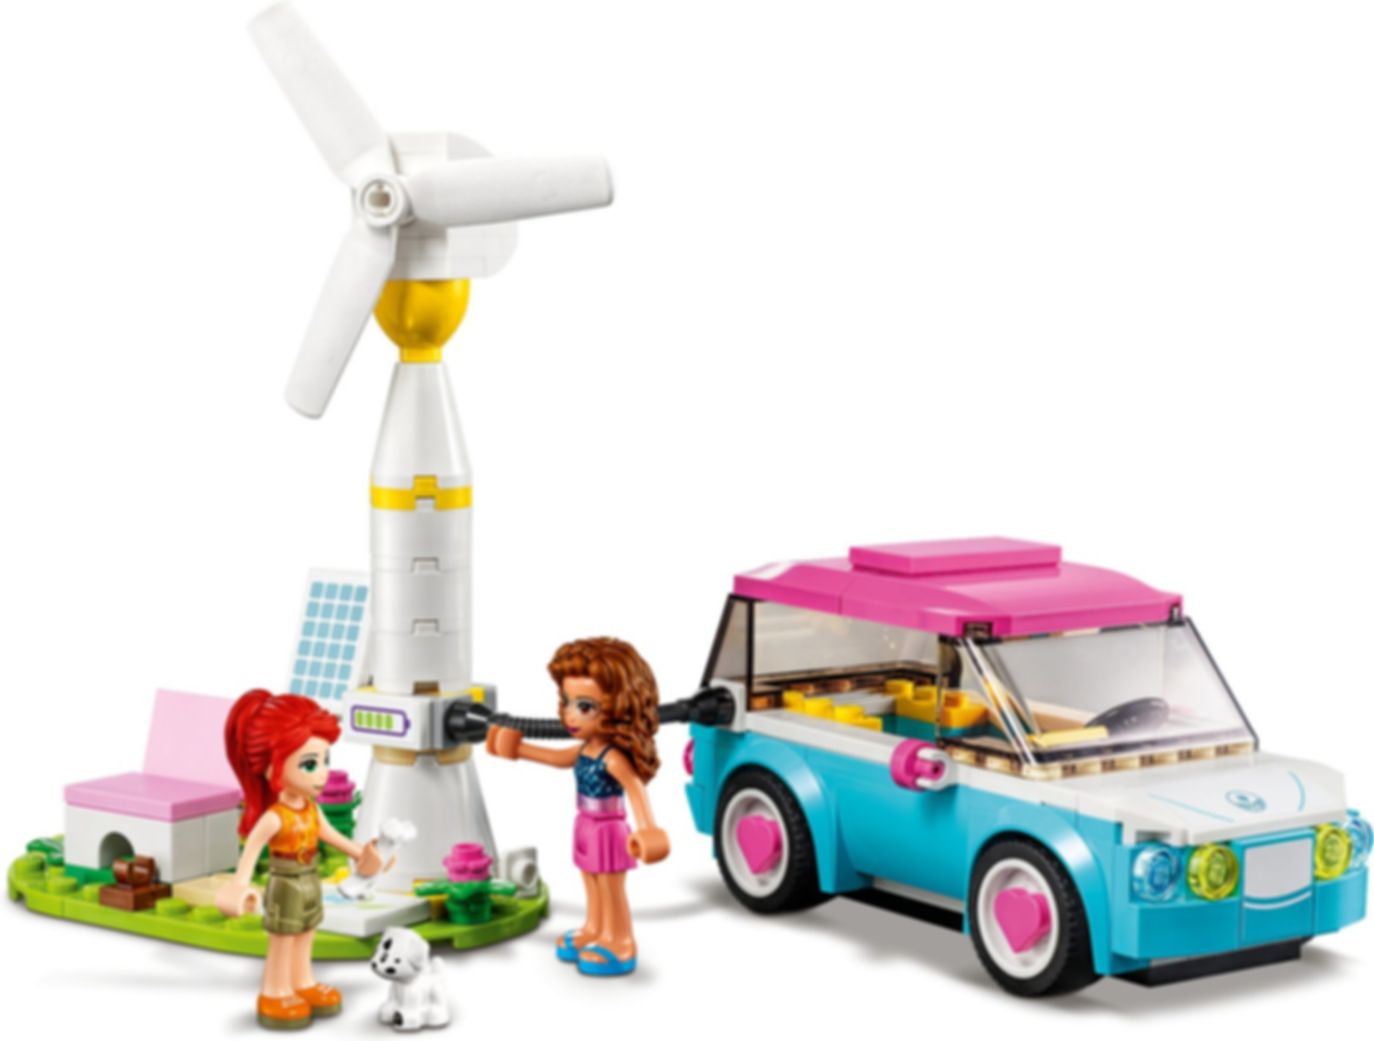 LEGO® Friends Olivia's Electric Car gameplay